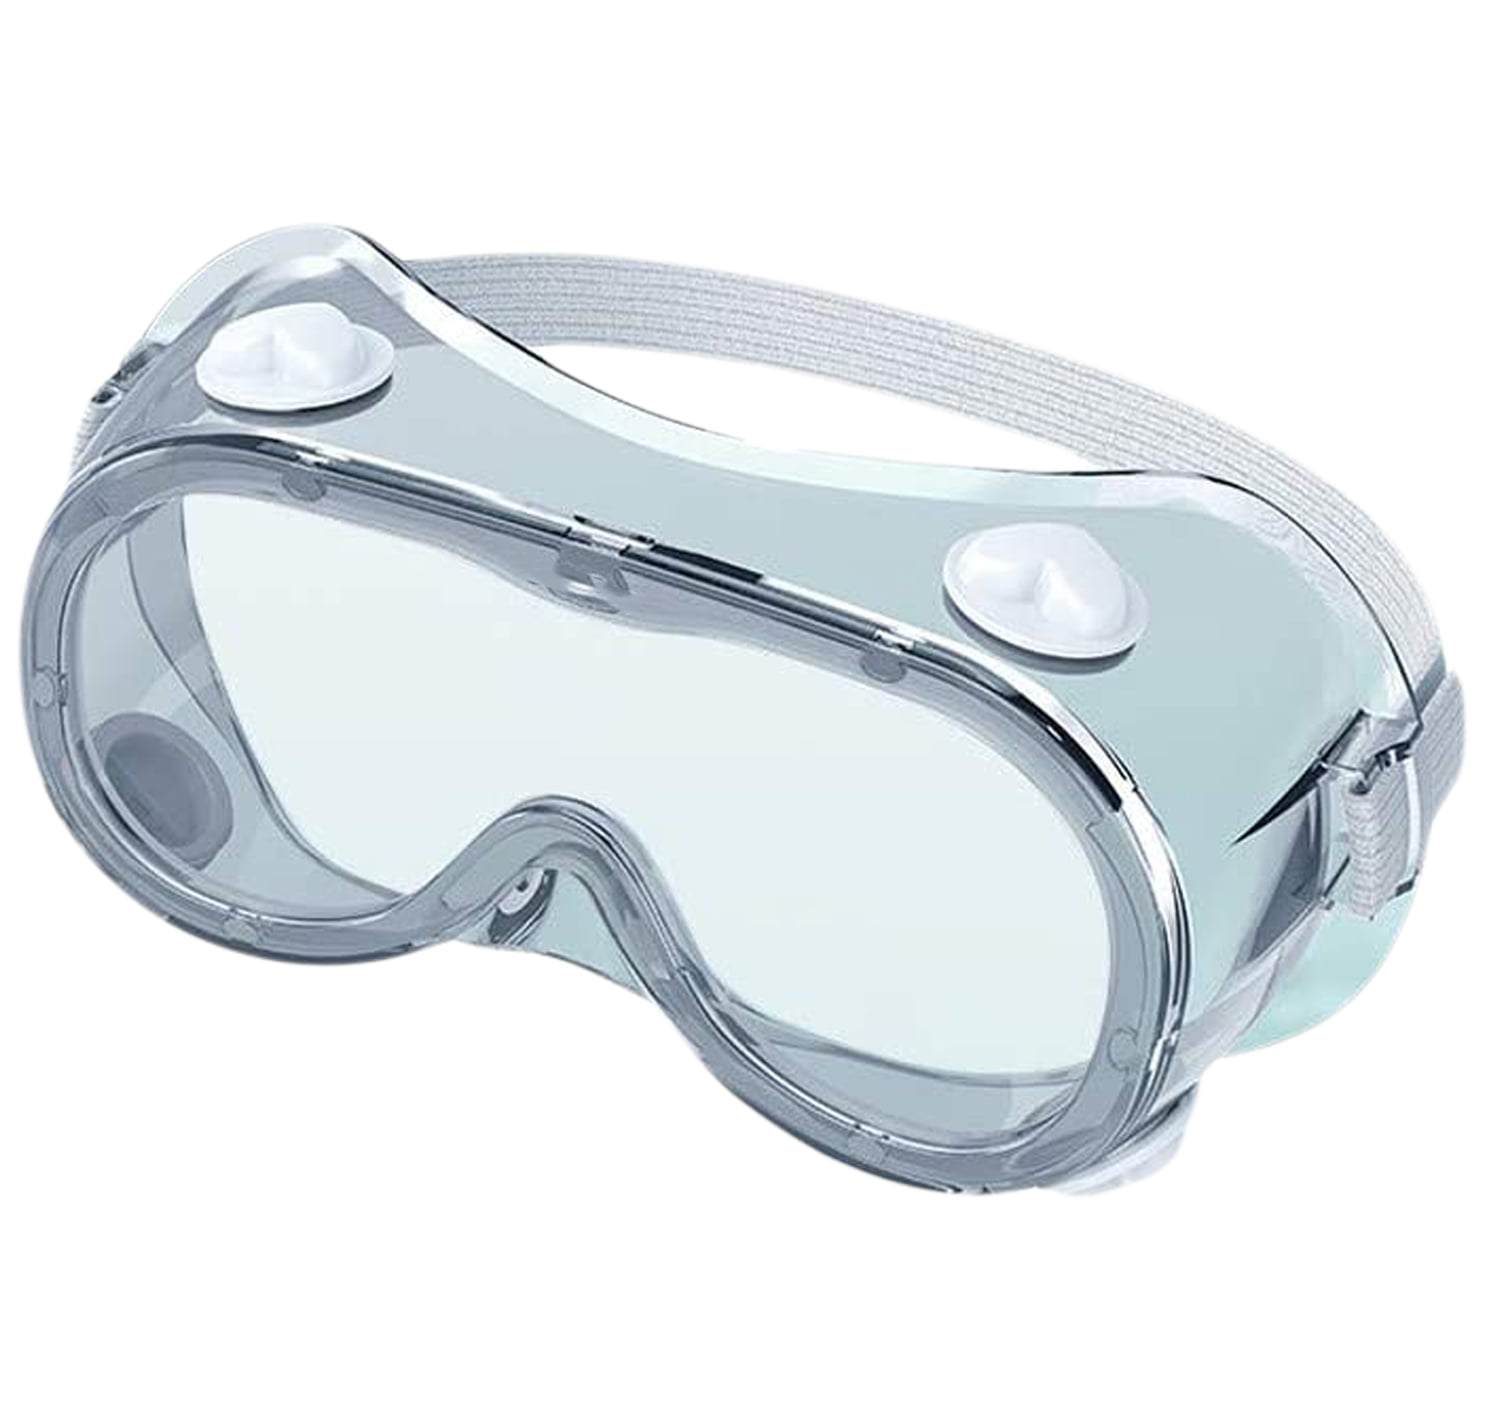 Details about   Anti Fog Goggles Glasses Side Shields Anti Blue Light protection Eye Glasses 